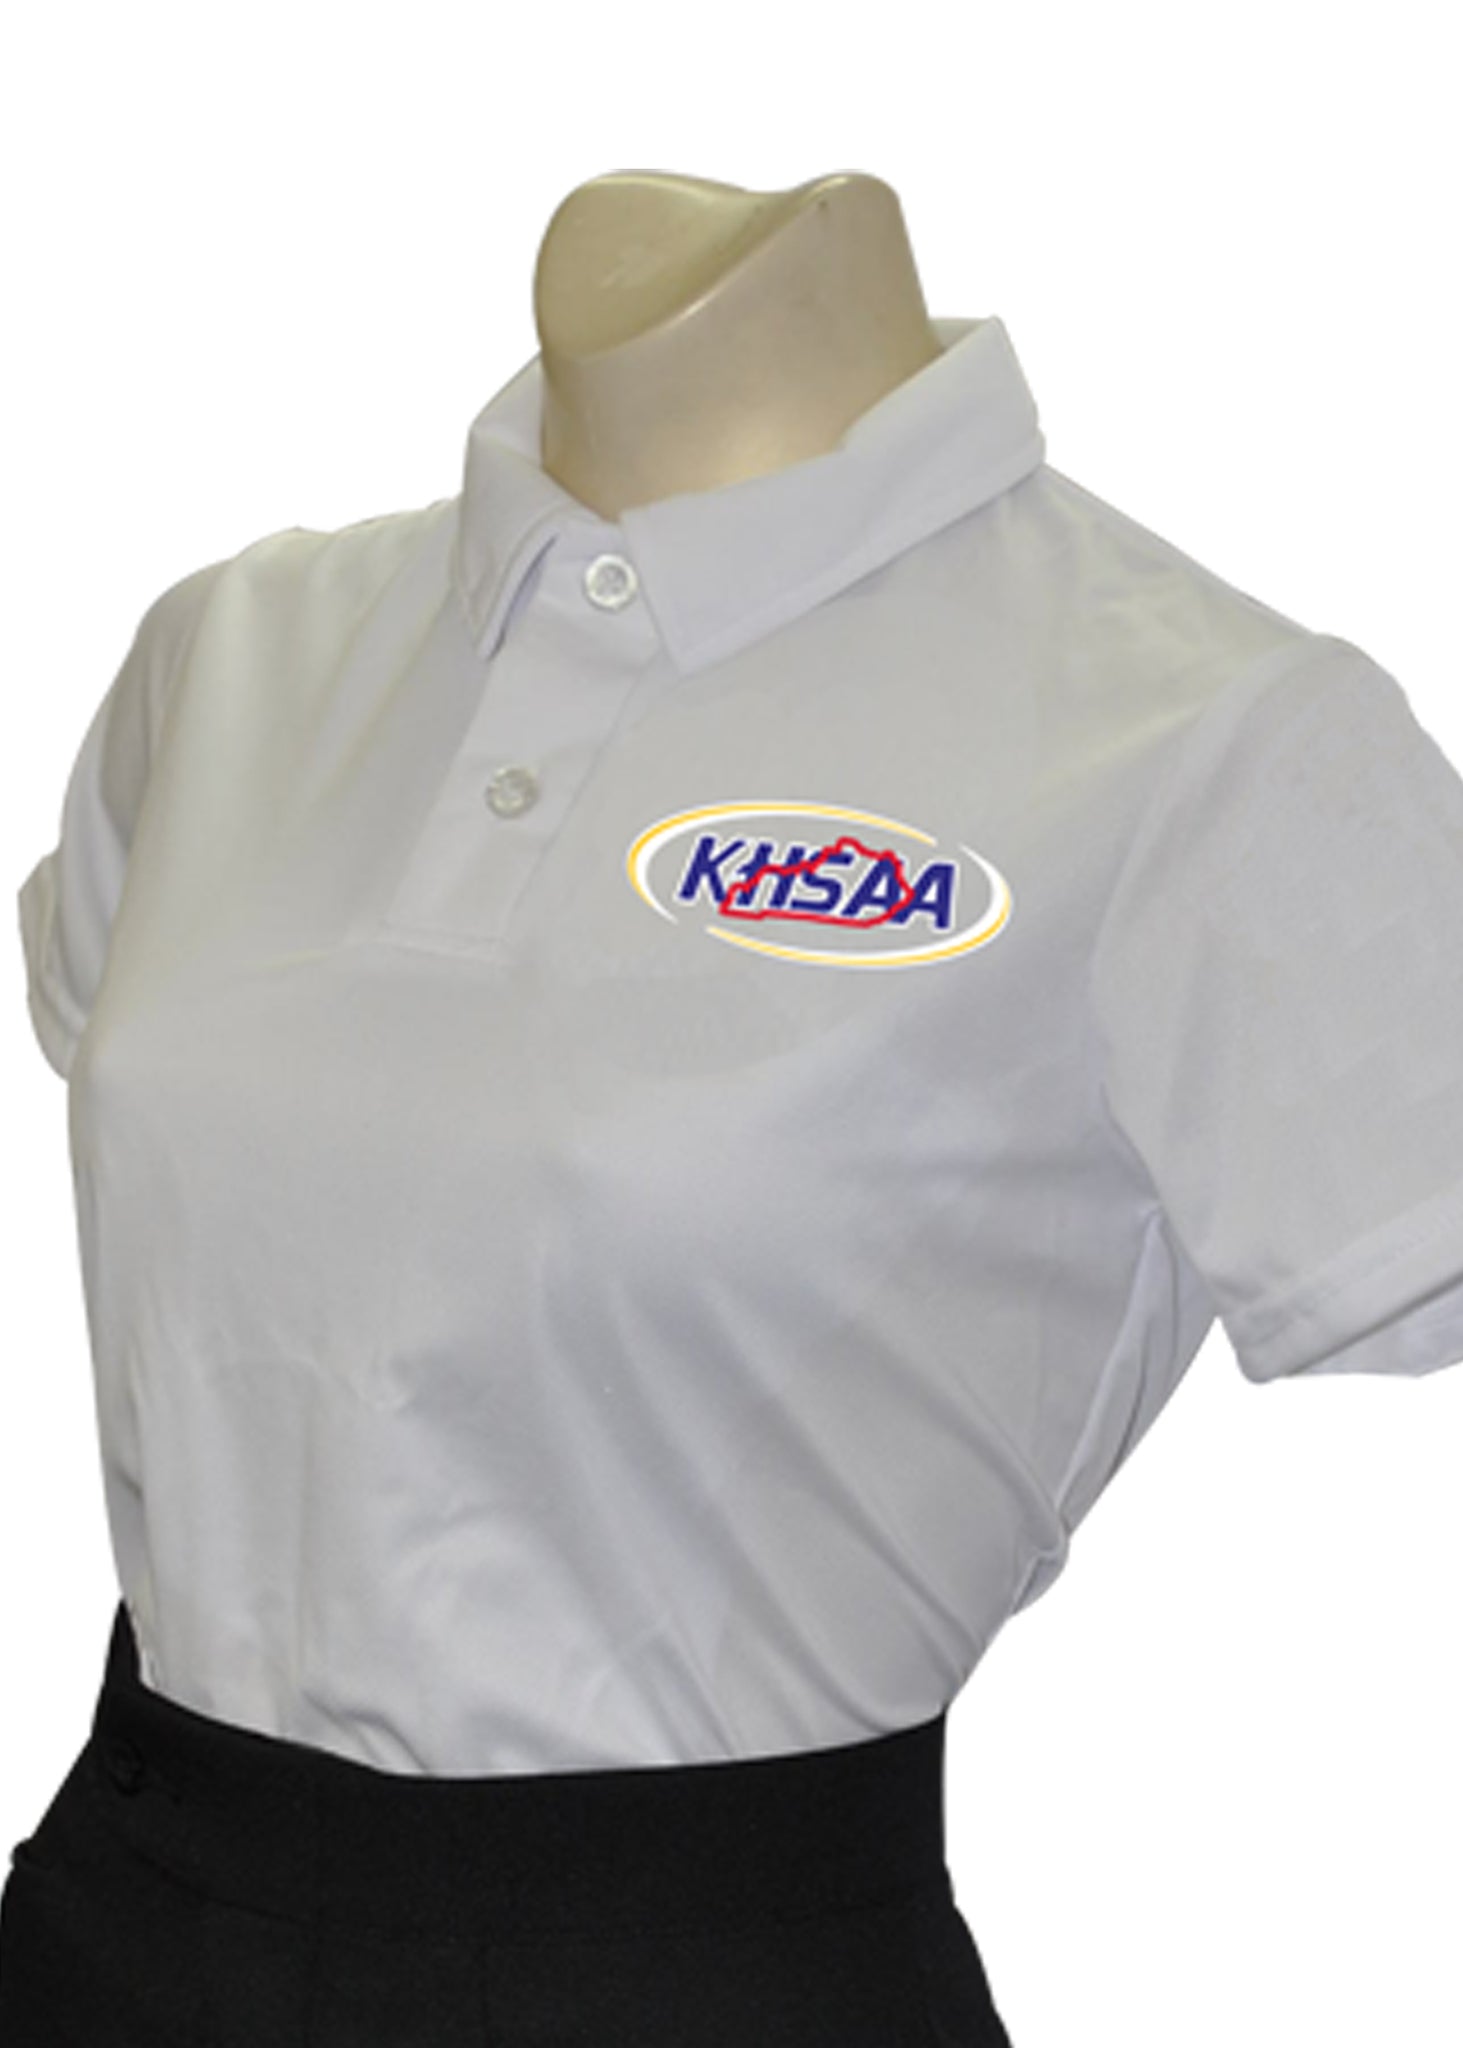 USA439KY - Smitty "Made in USA" - Volleyball Women's Short Sleeve Shirt